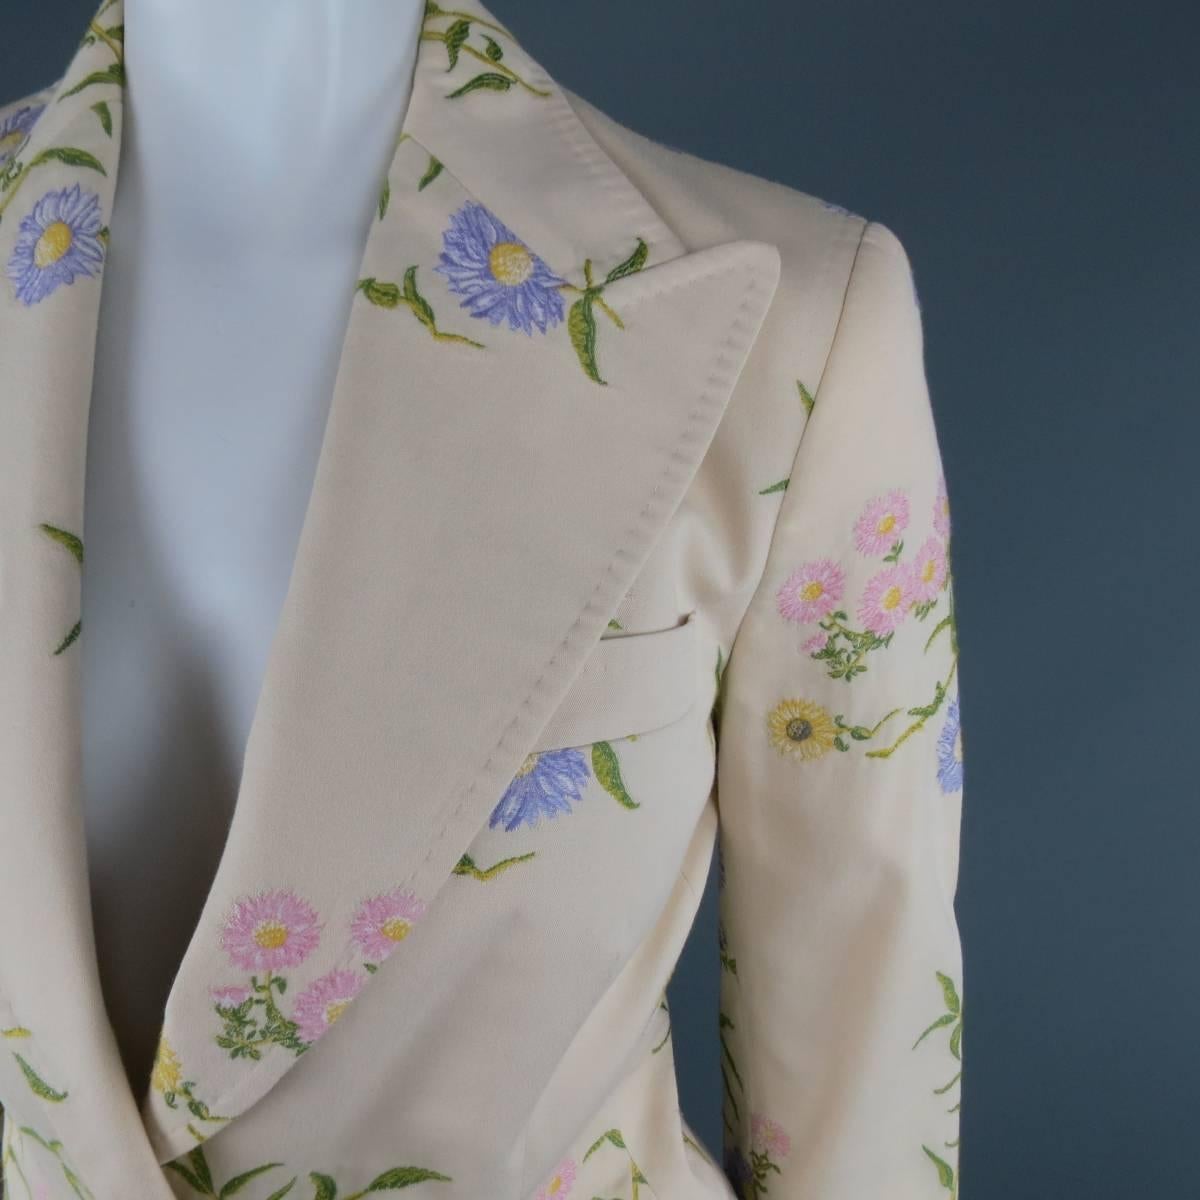 DOLCE & GABBANA blazer in a khaki beige cotton blend with all over pink, purple, and yellow daisy floral embroidered print throughout featuring a wide peak lapel with top stitching, simulated flap pockets, and dark silver tone engraved buttons with